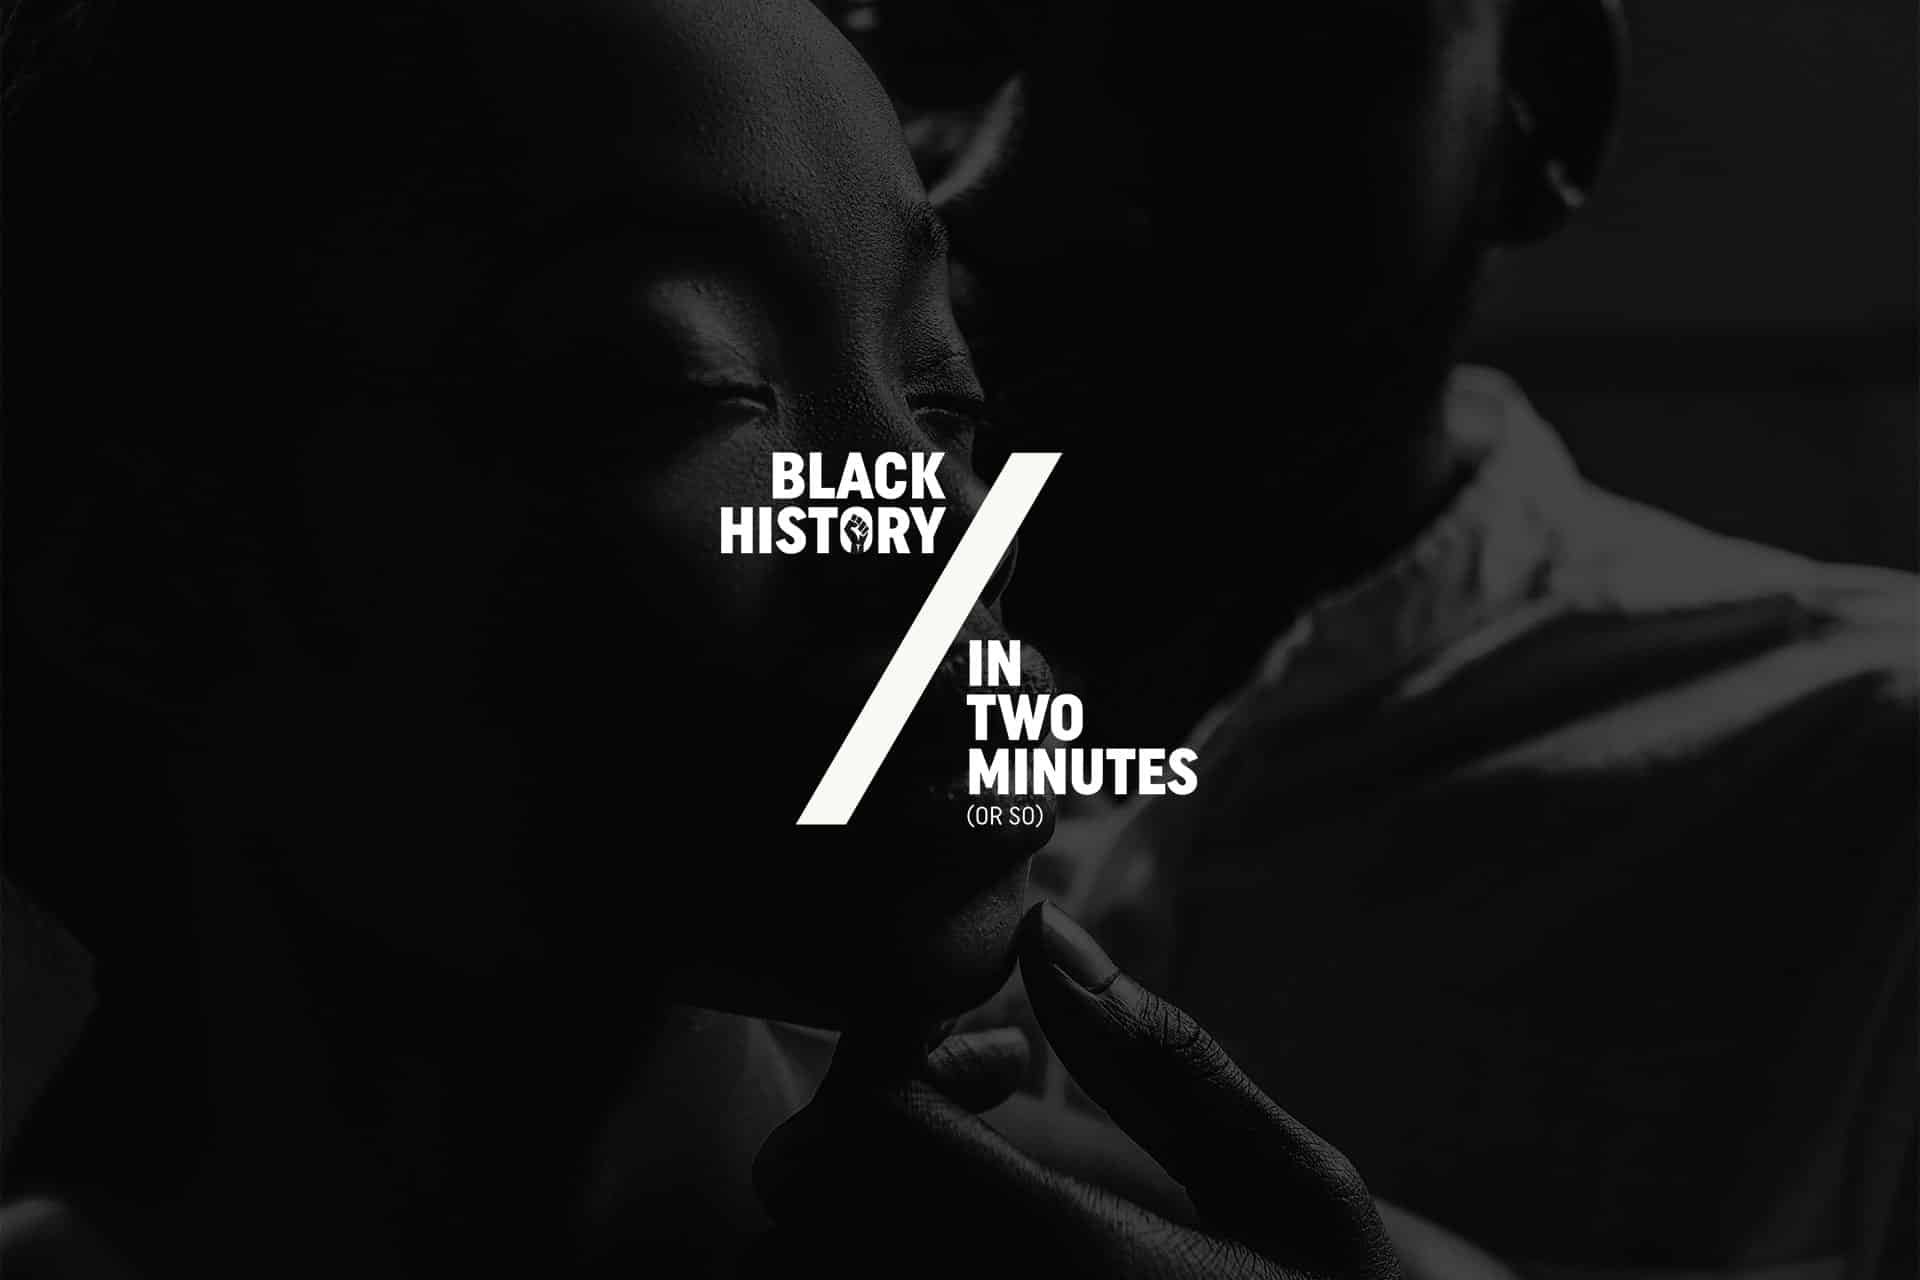 Black History in 2 Minutes (or so)